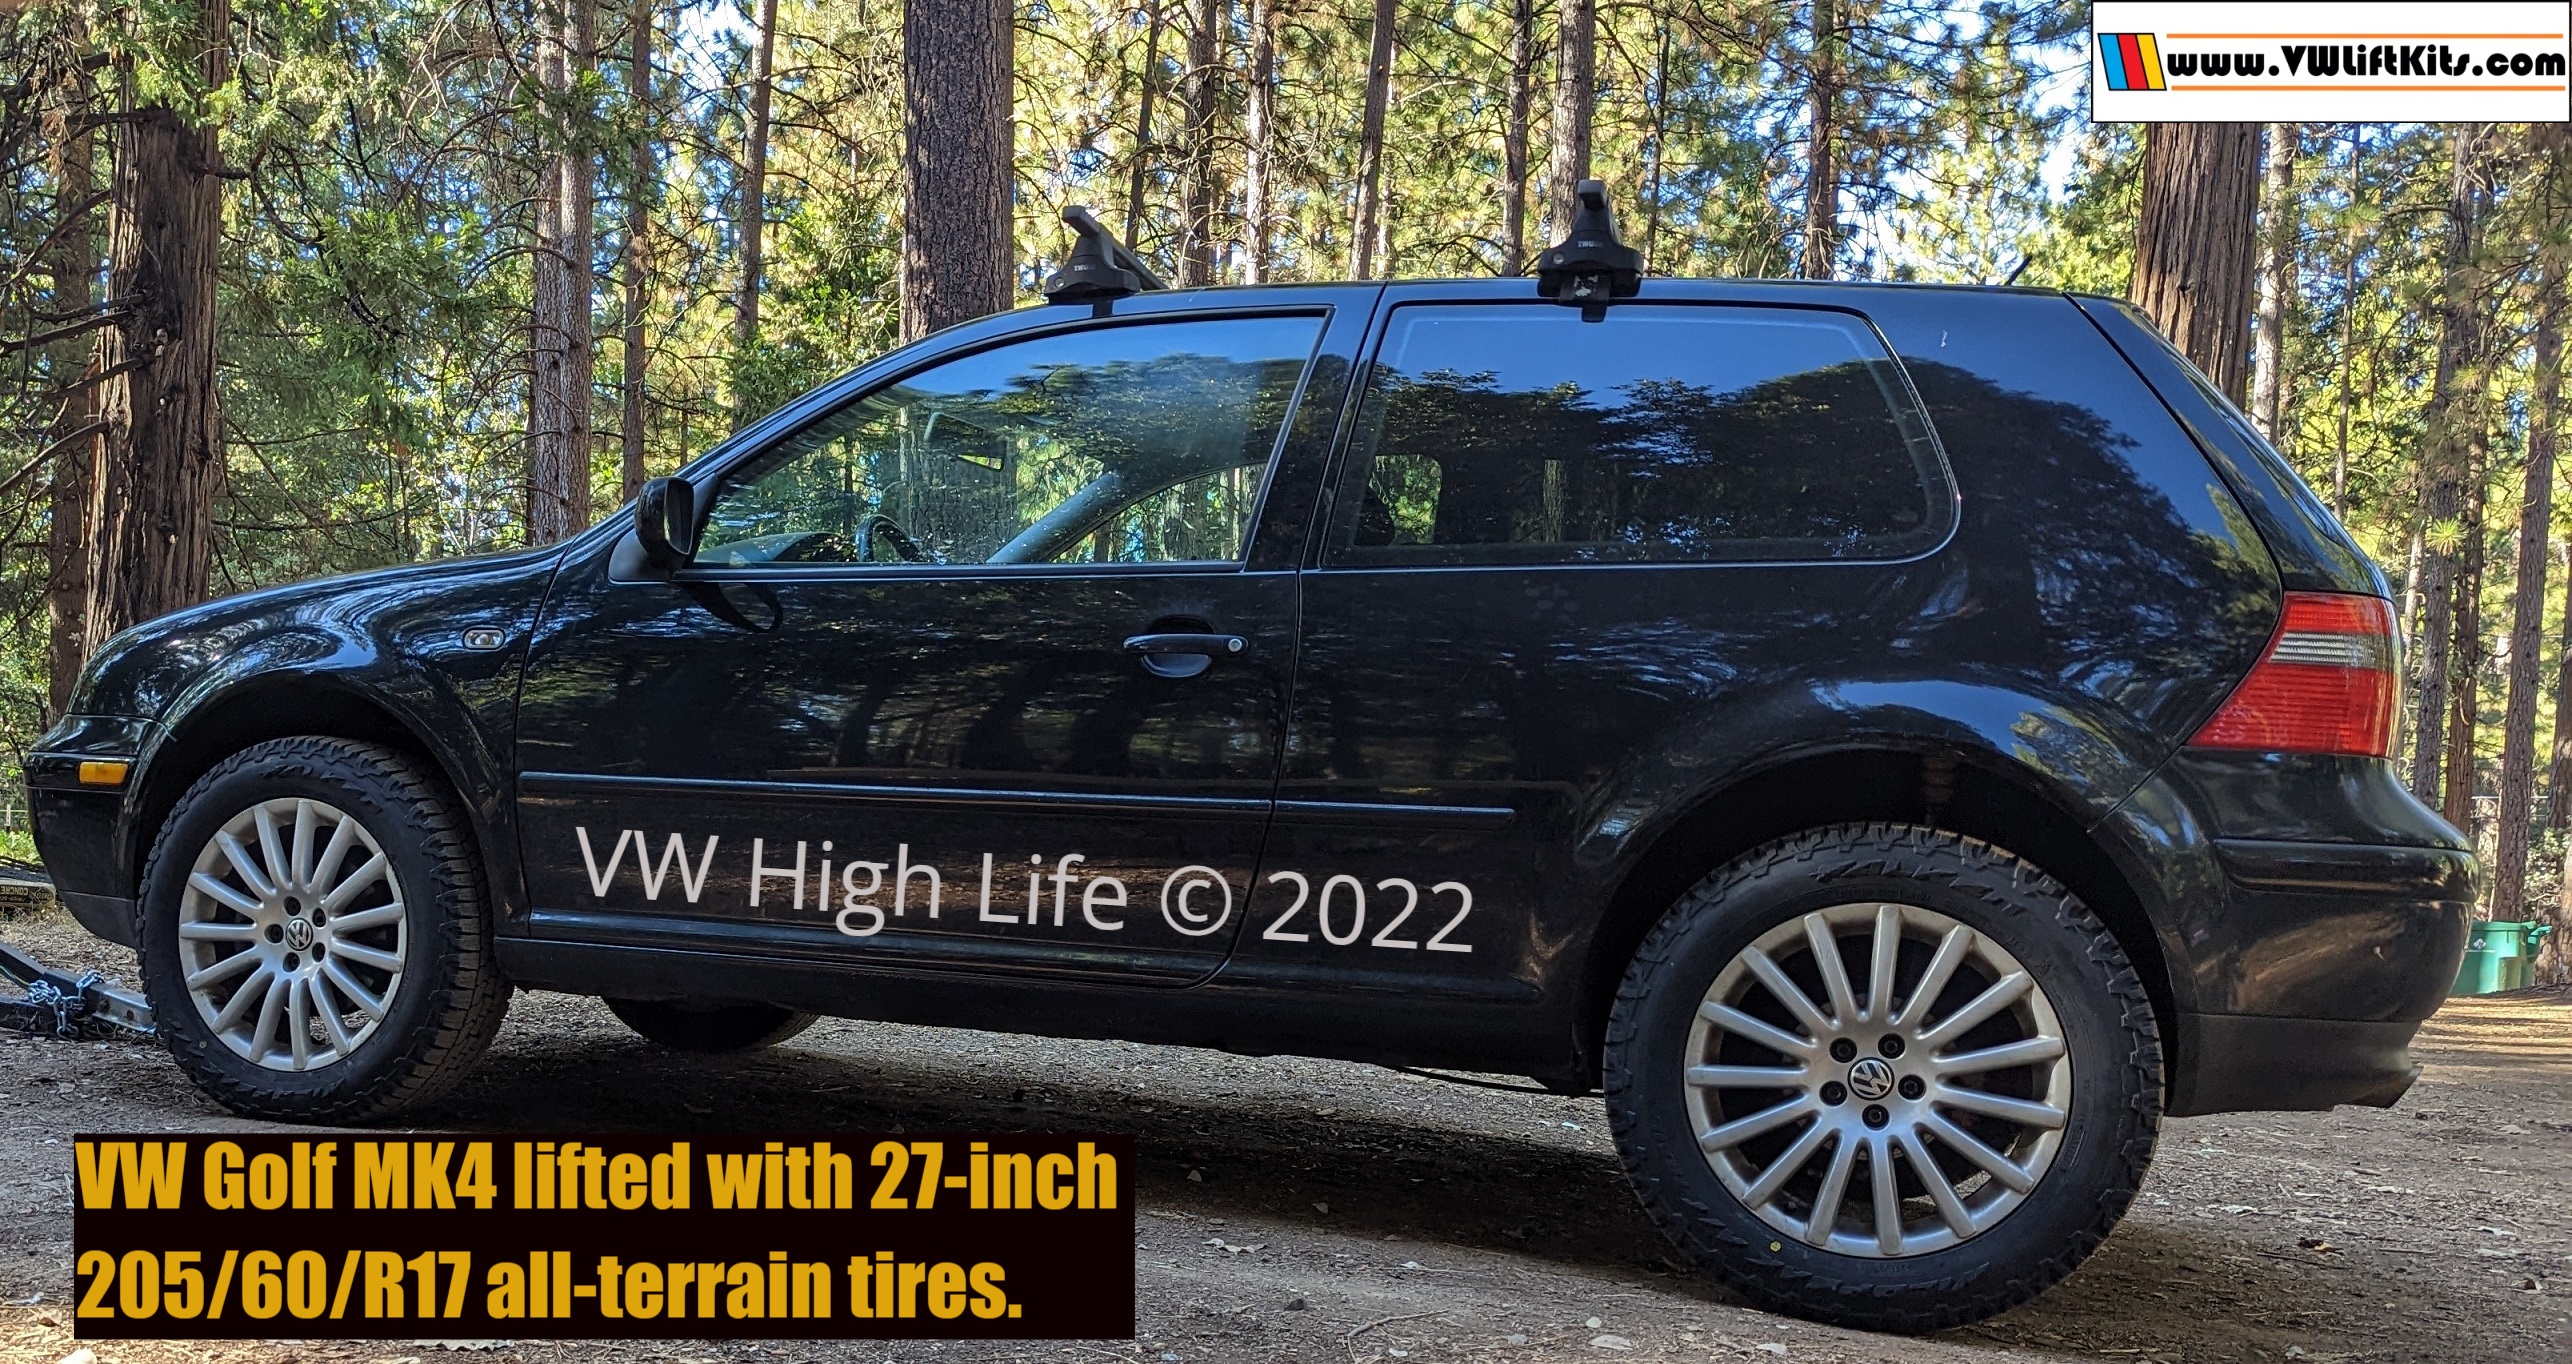 Justin properly lifted his MK4 Golf to make room for some 27-inch (205/60/R17) all-terrain tires. 